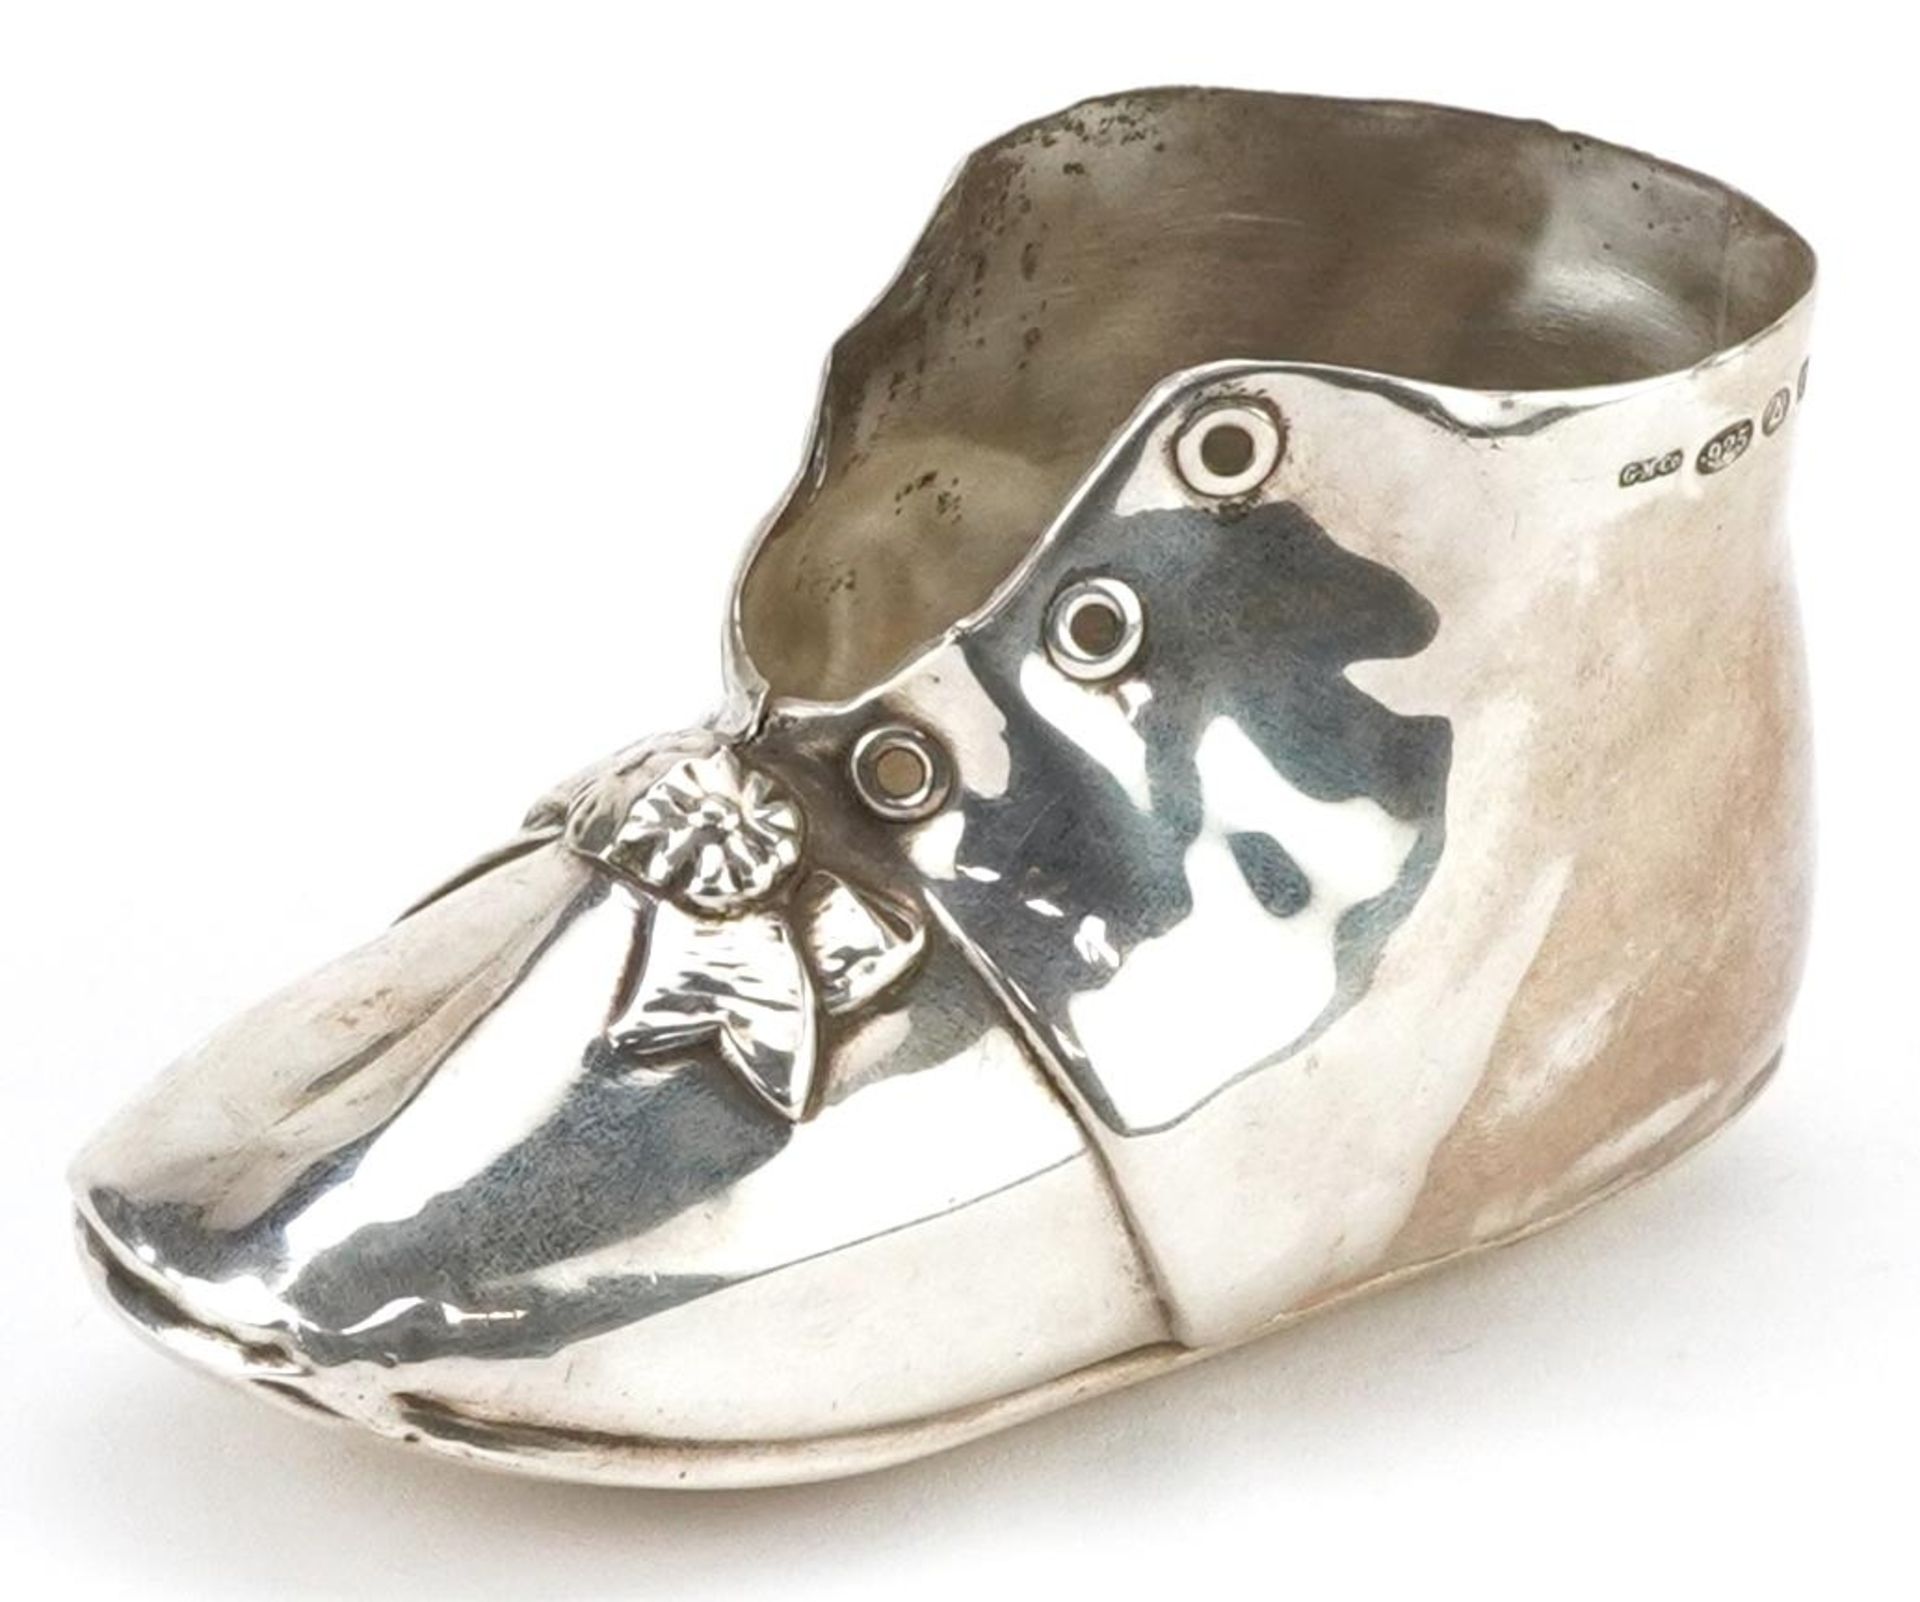 Gorham Manufacturing Co, novelty silver pin cushion in the form of a shoe, import marks for